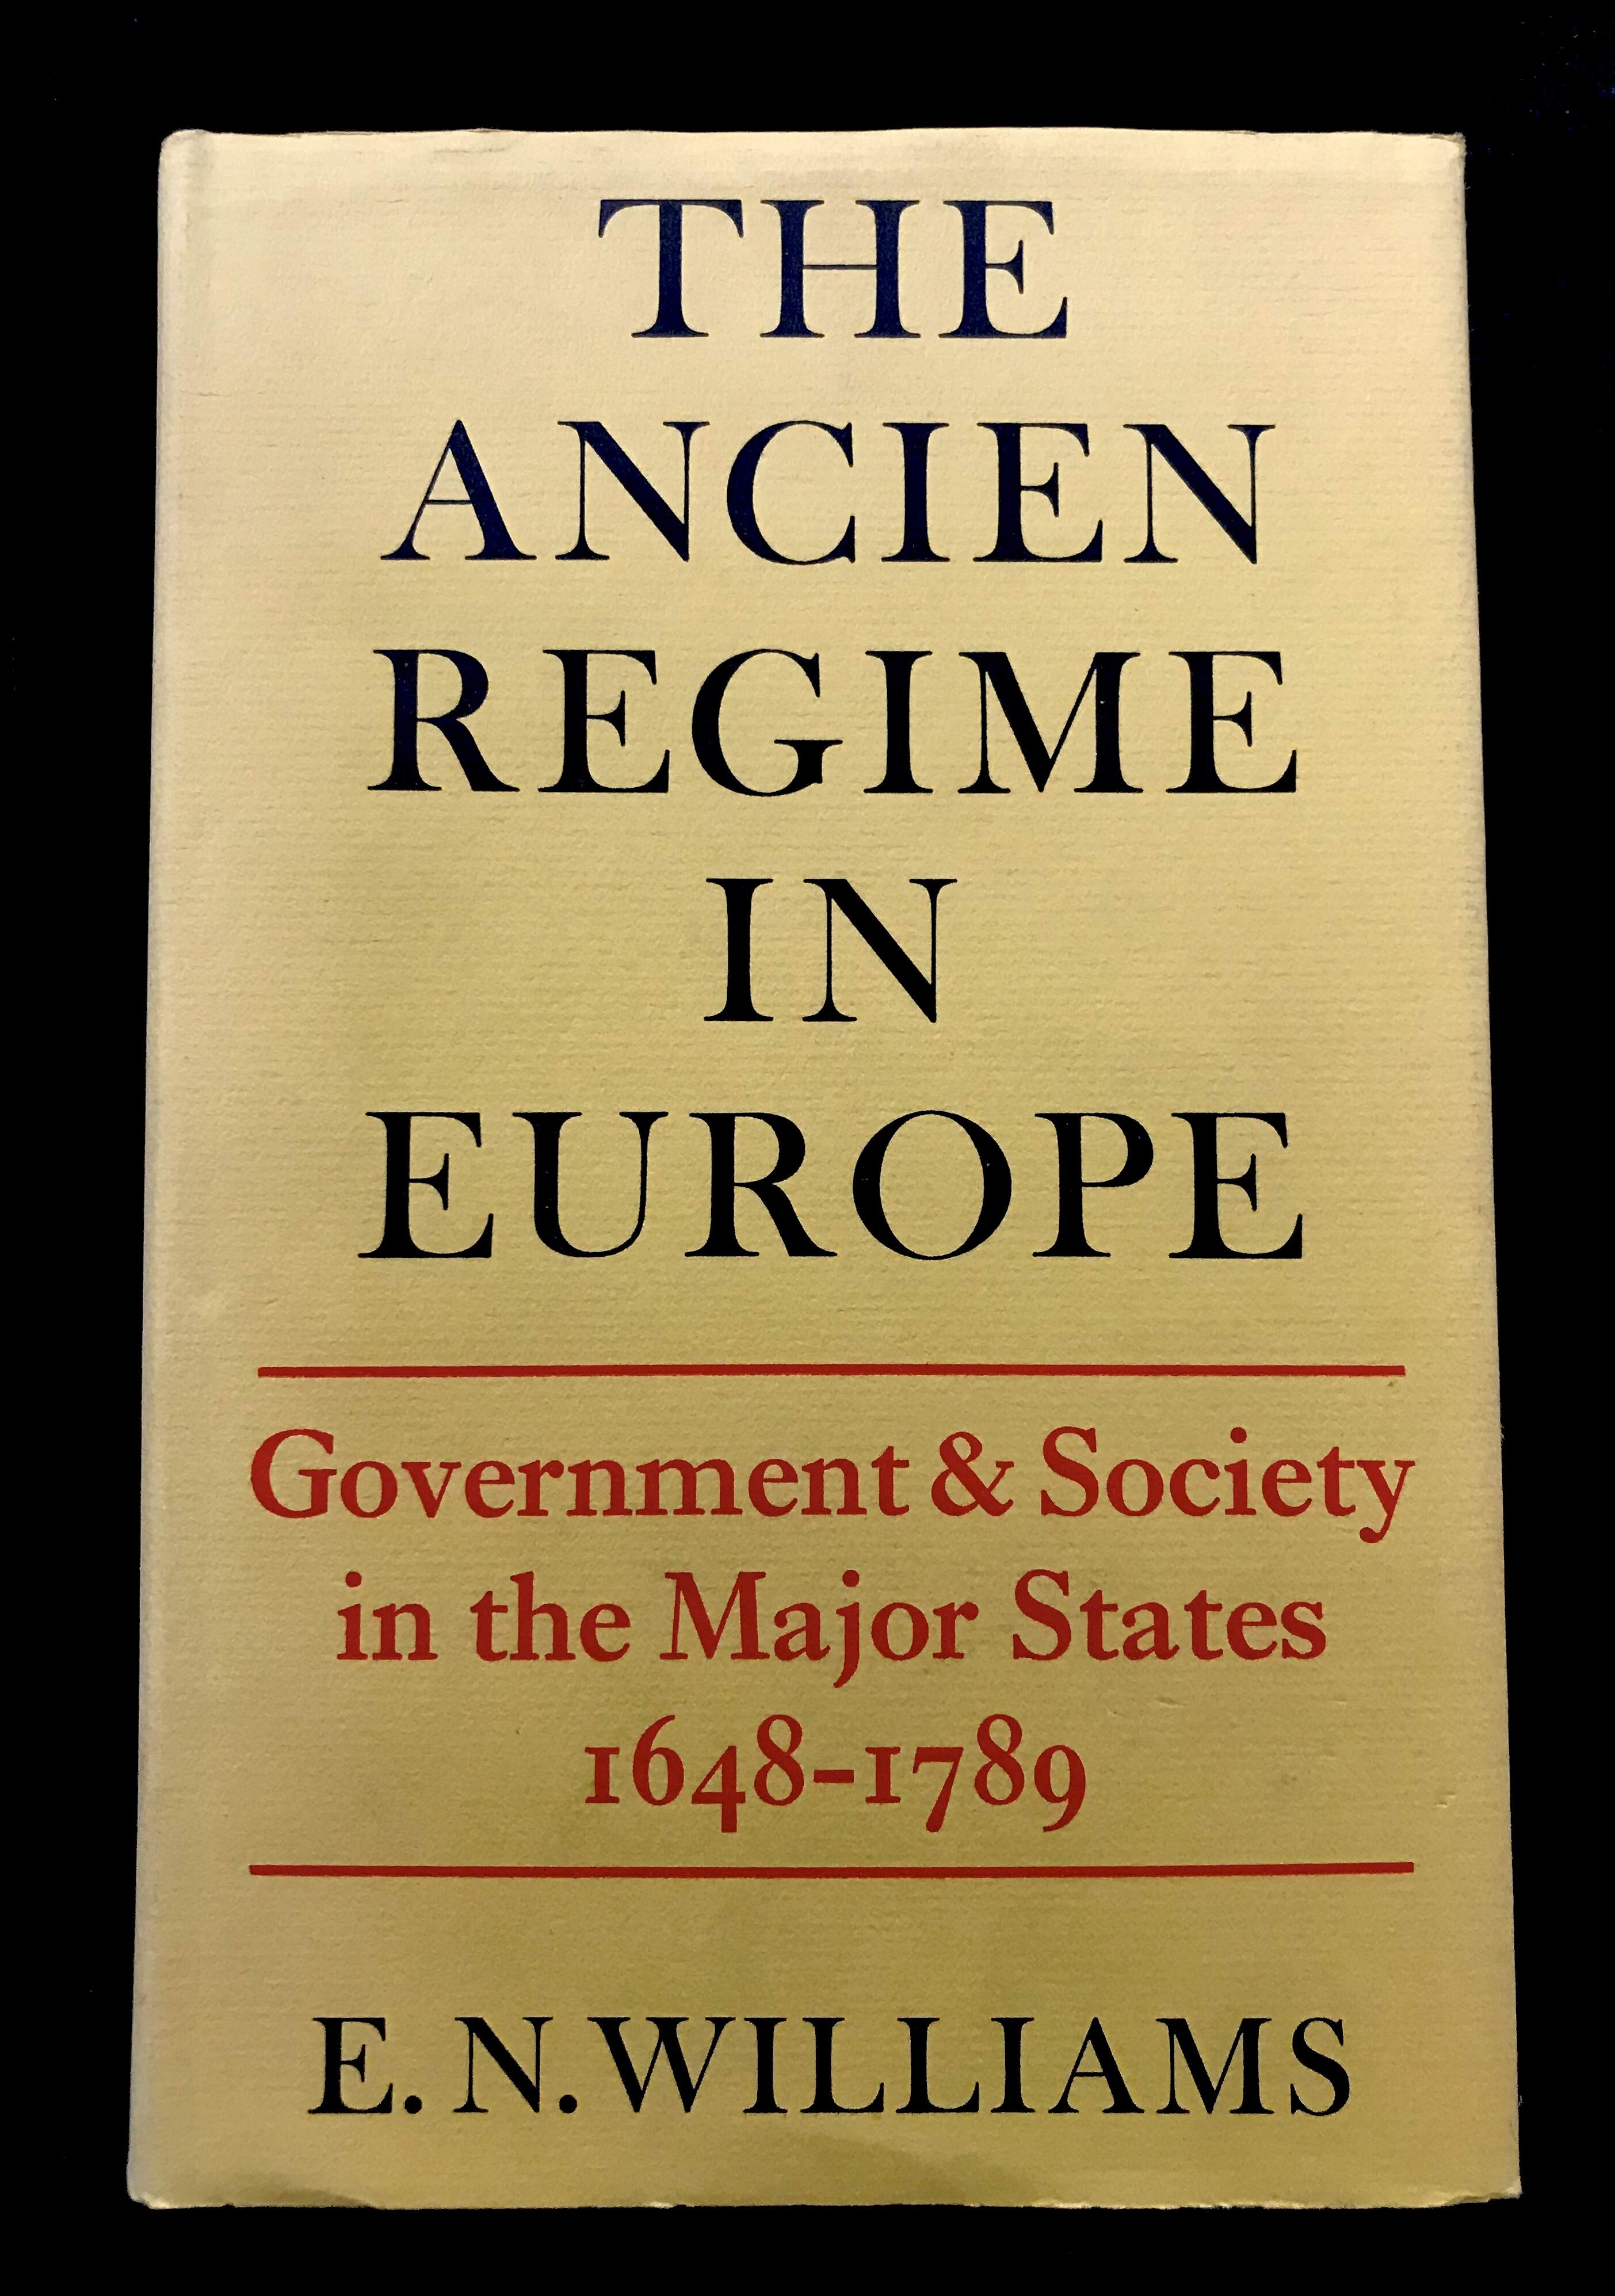 The Ancien Regime In Europe by E. N. Williams